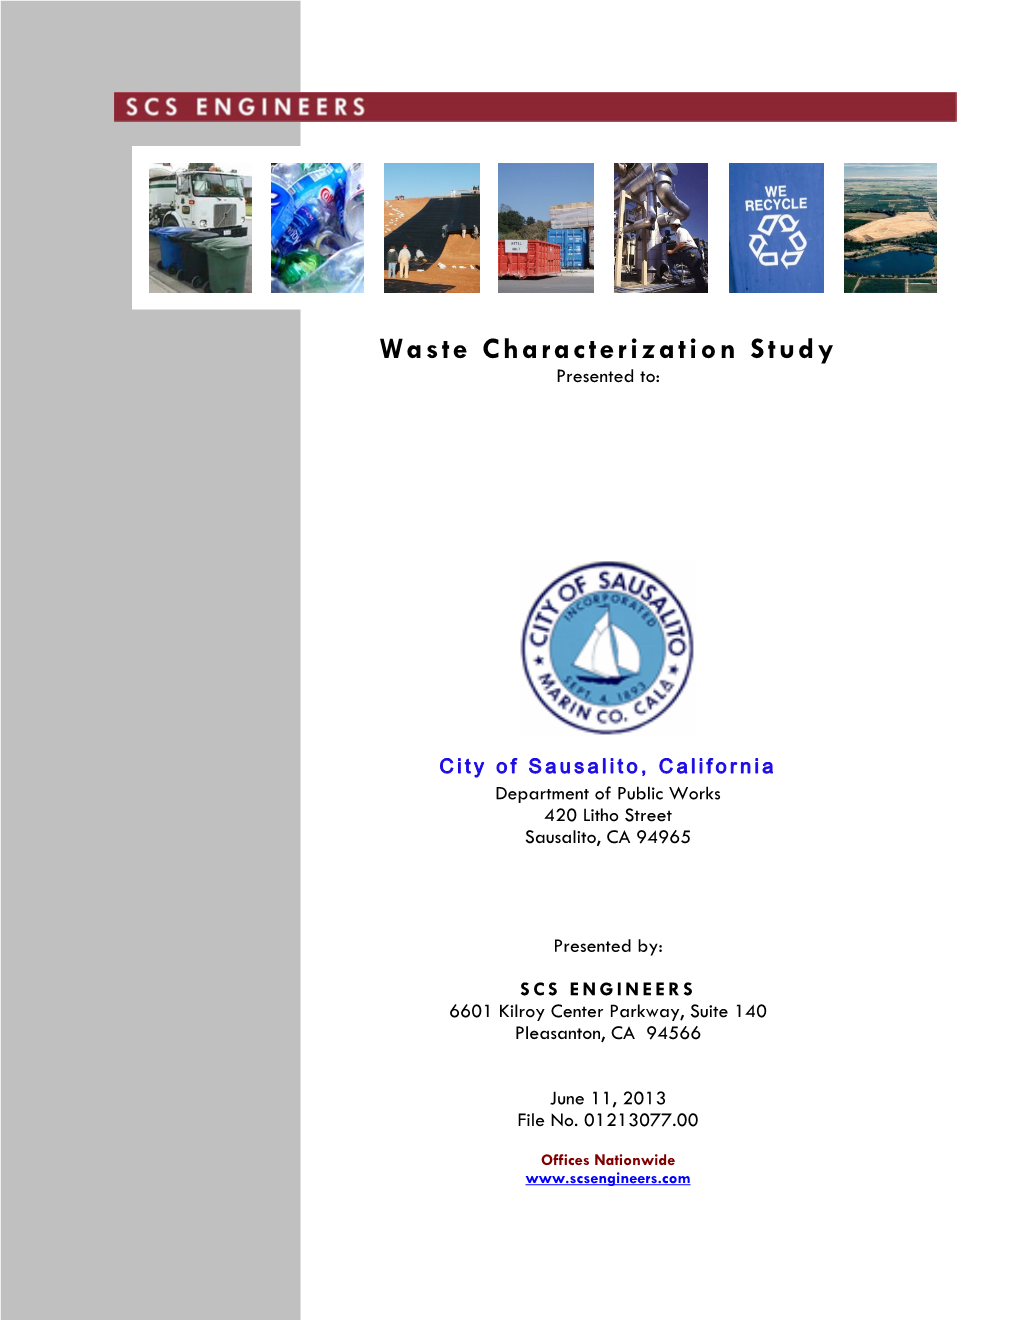 Waste Characterization Study Presented To